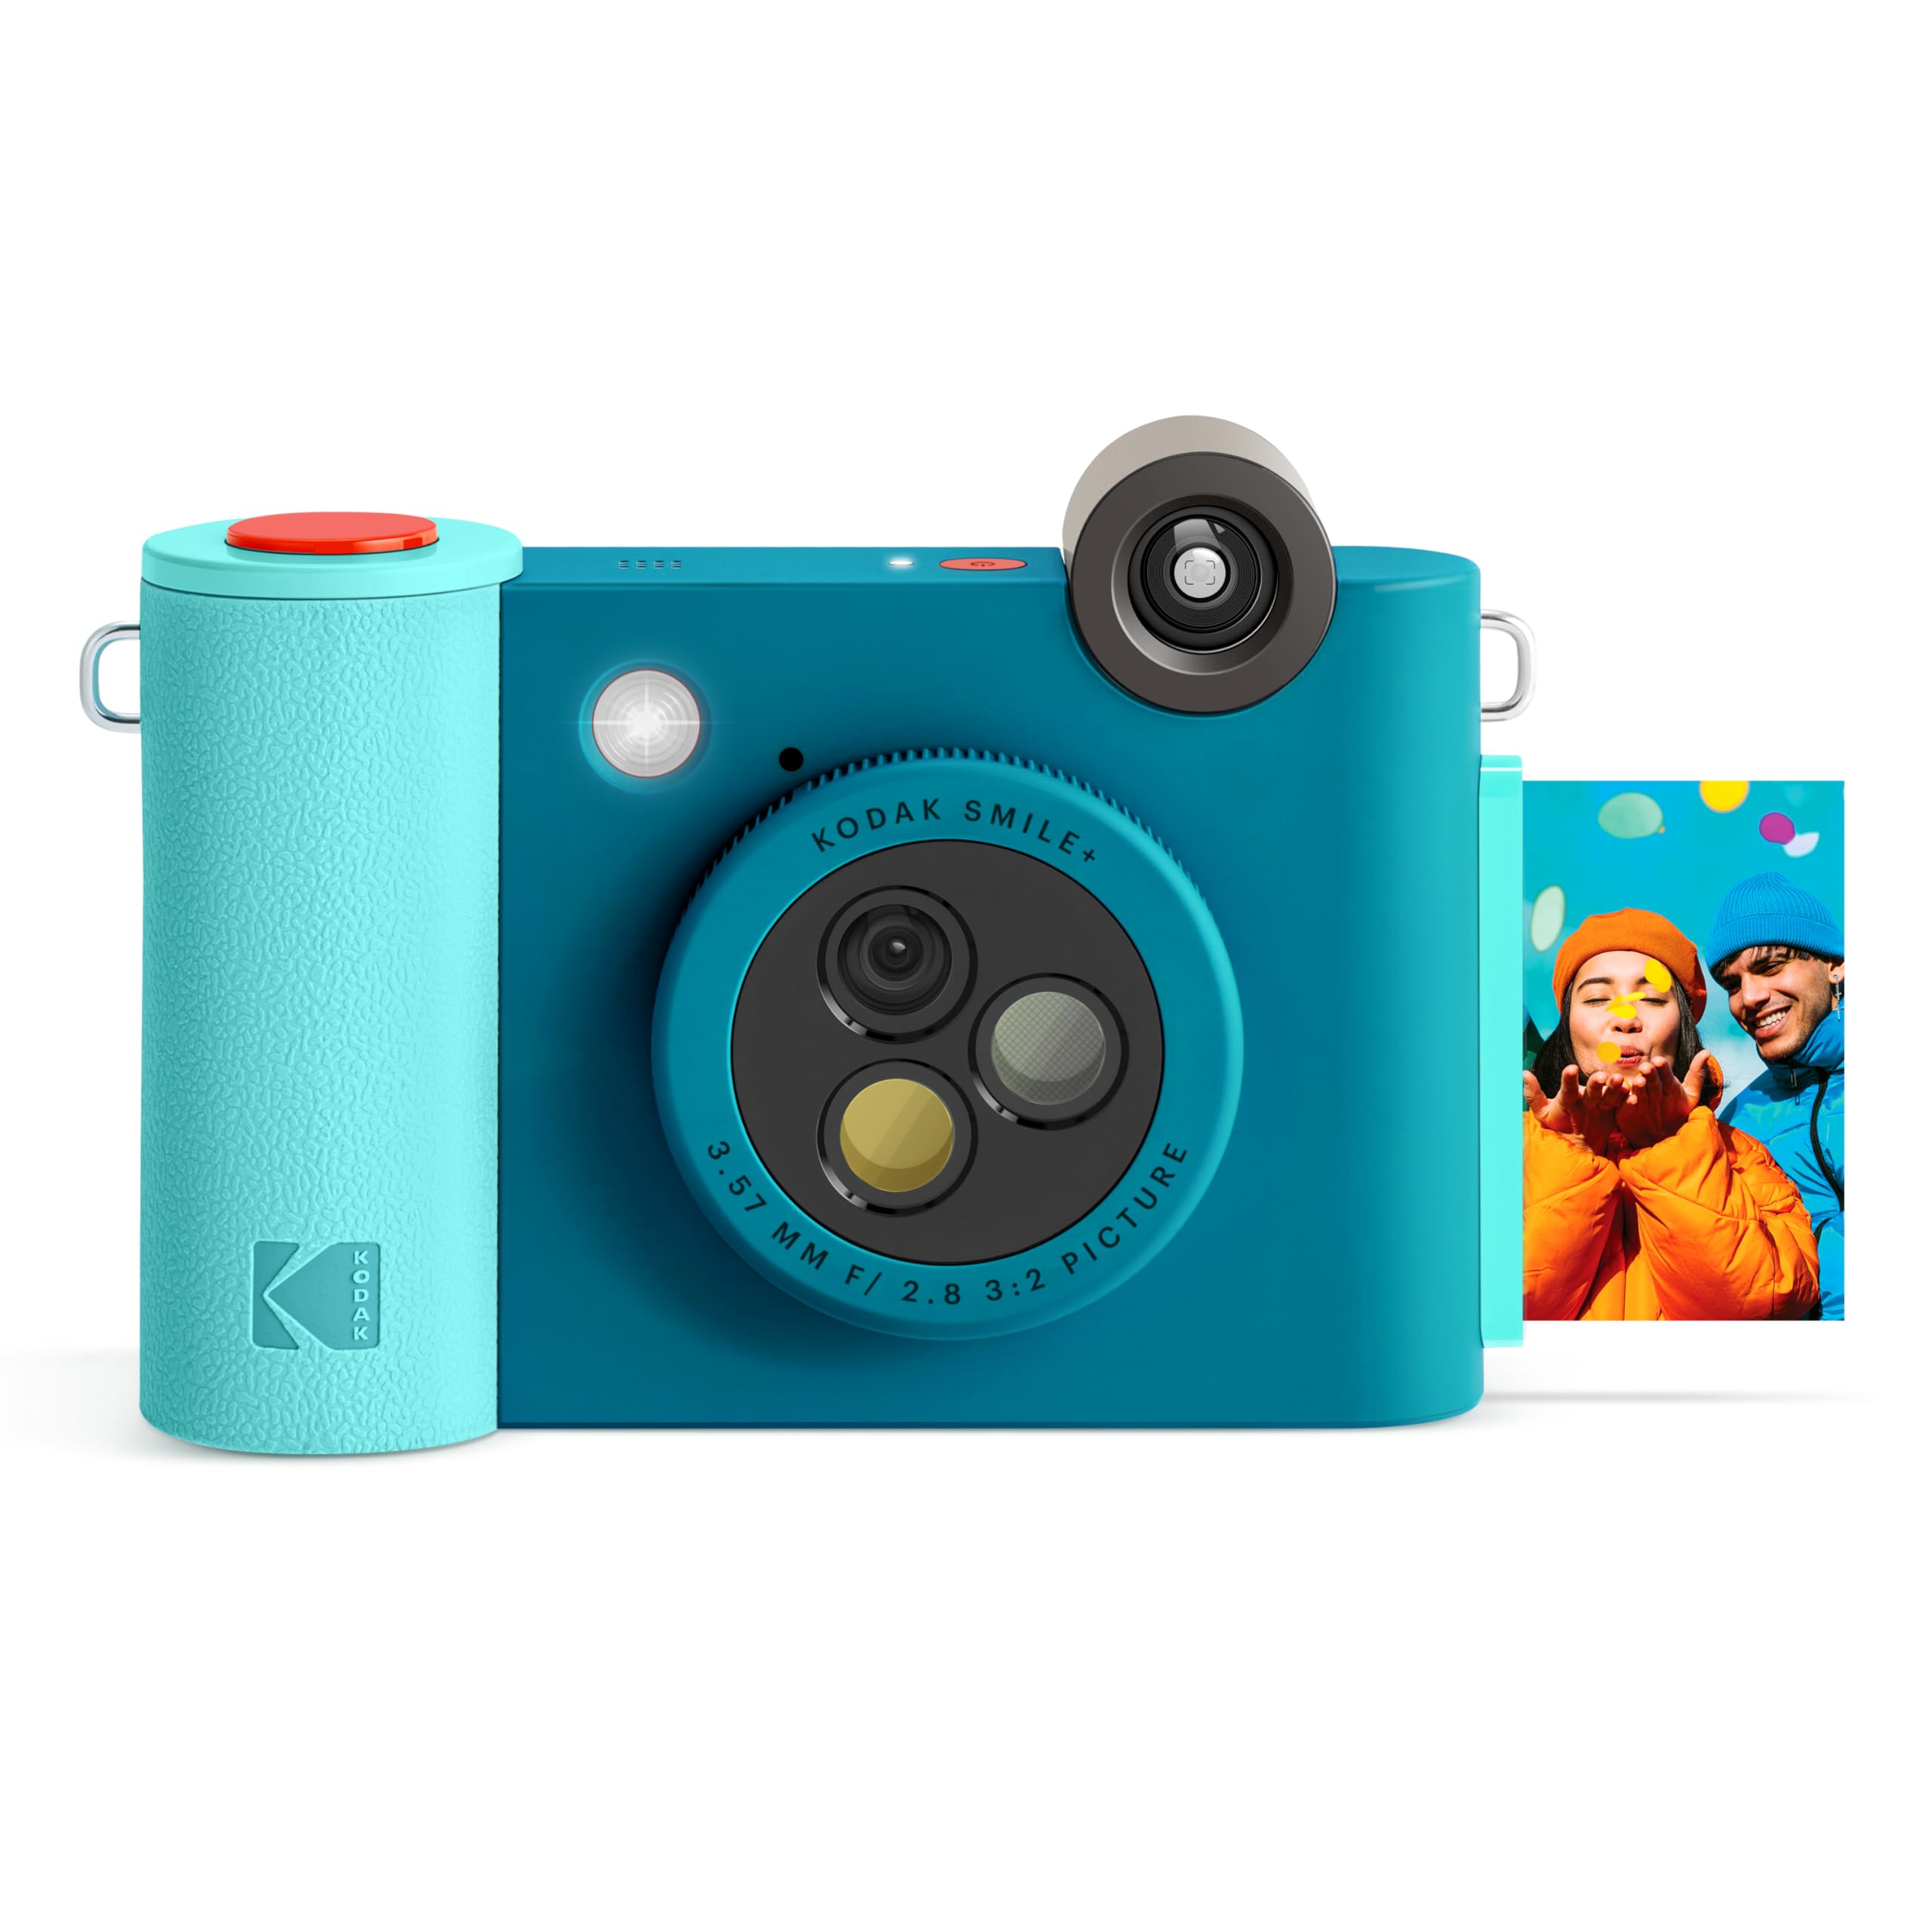 KODAK Smile+ Wireless Digital Instant Print Camera with Effect-Changing Lens, 2x3” Sticky-Backed Photo Prints, and Zink Printing Technology, Compatible with iOS and Android Devices - Blue